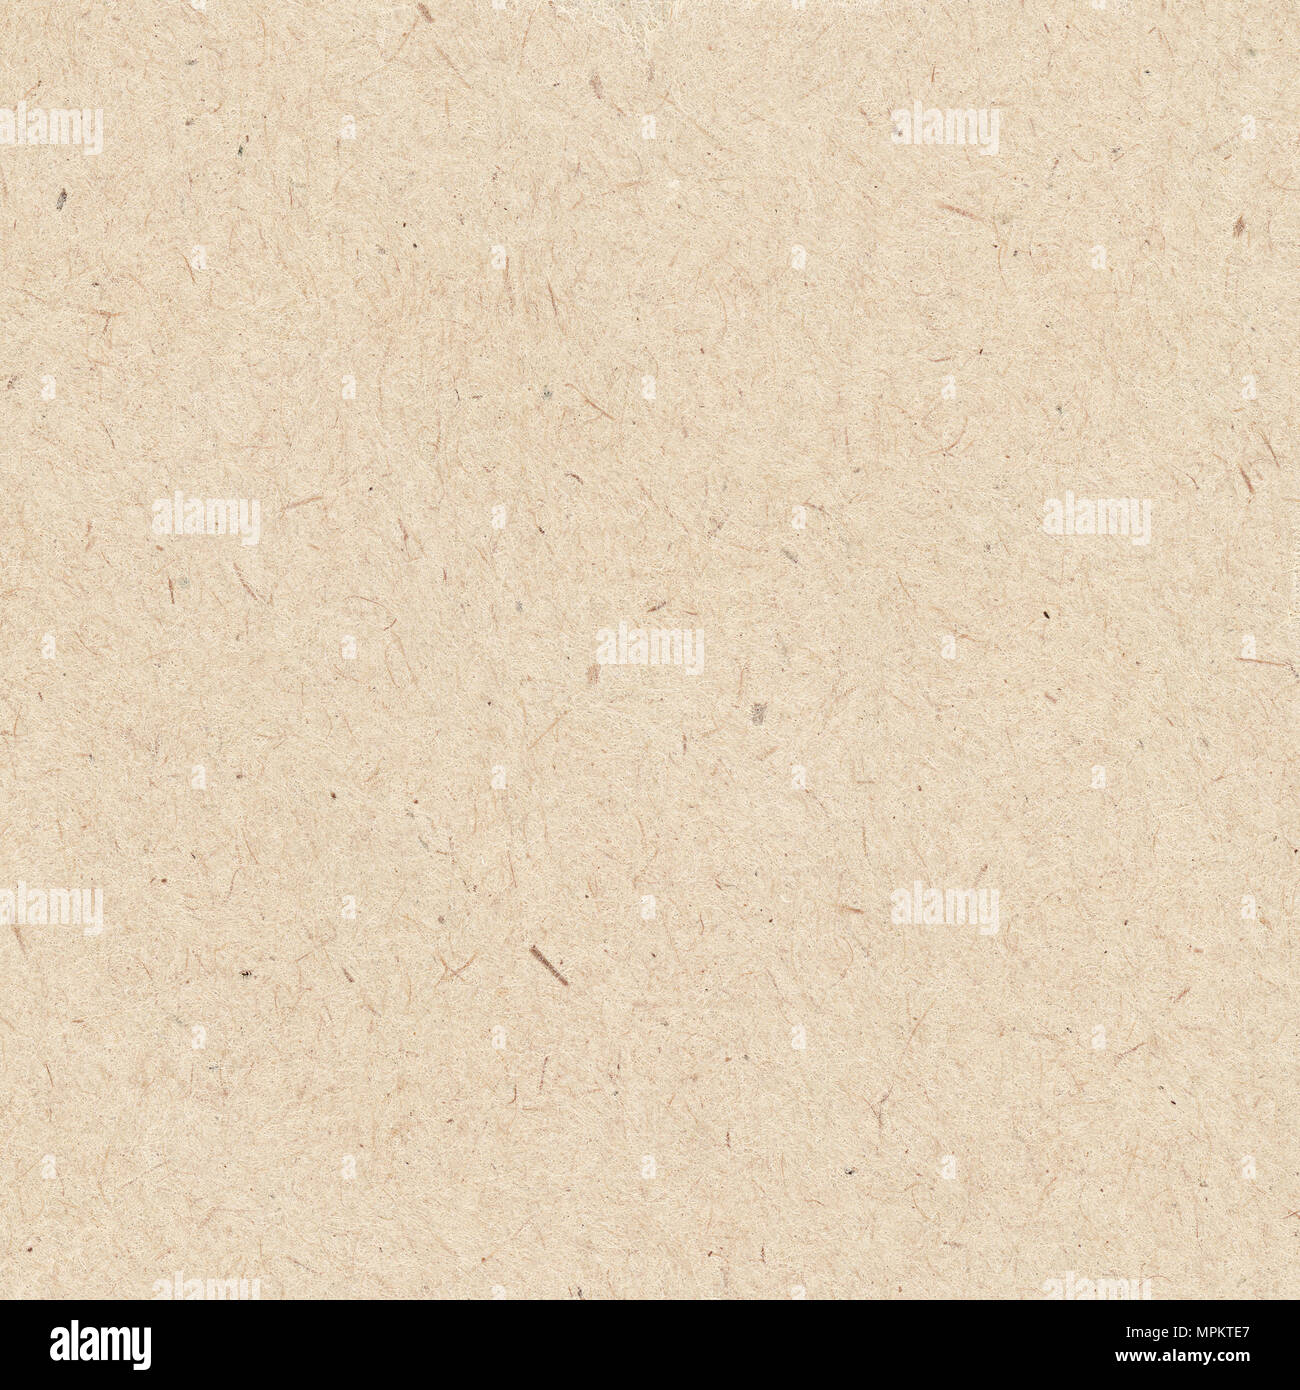 Clean square recycled brown paper texture or background Stock Photo